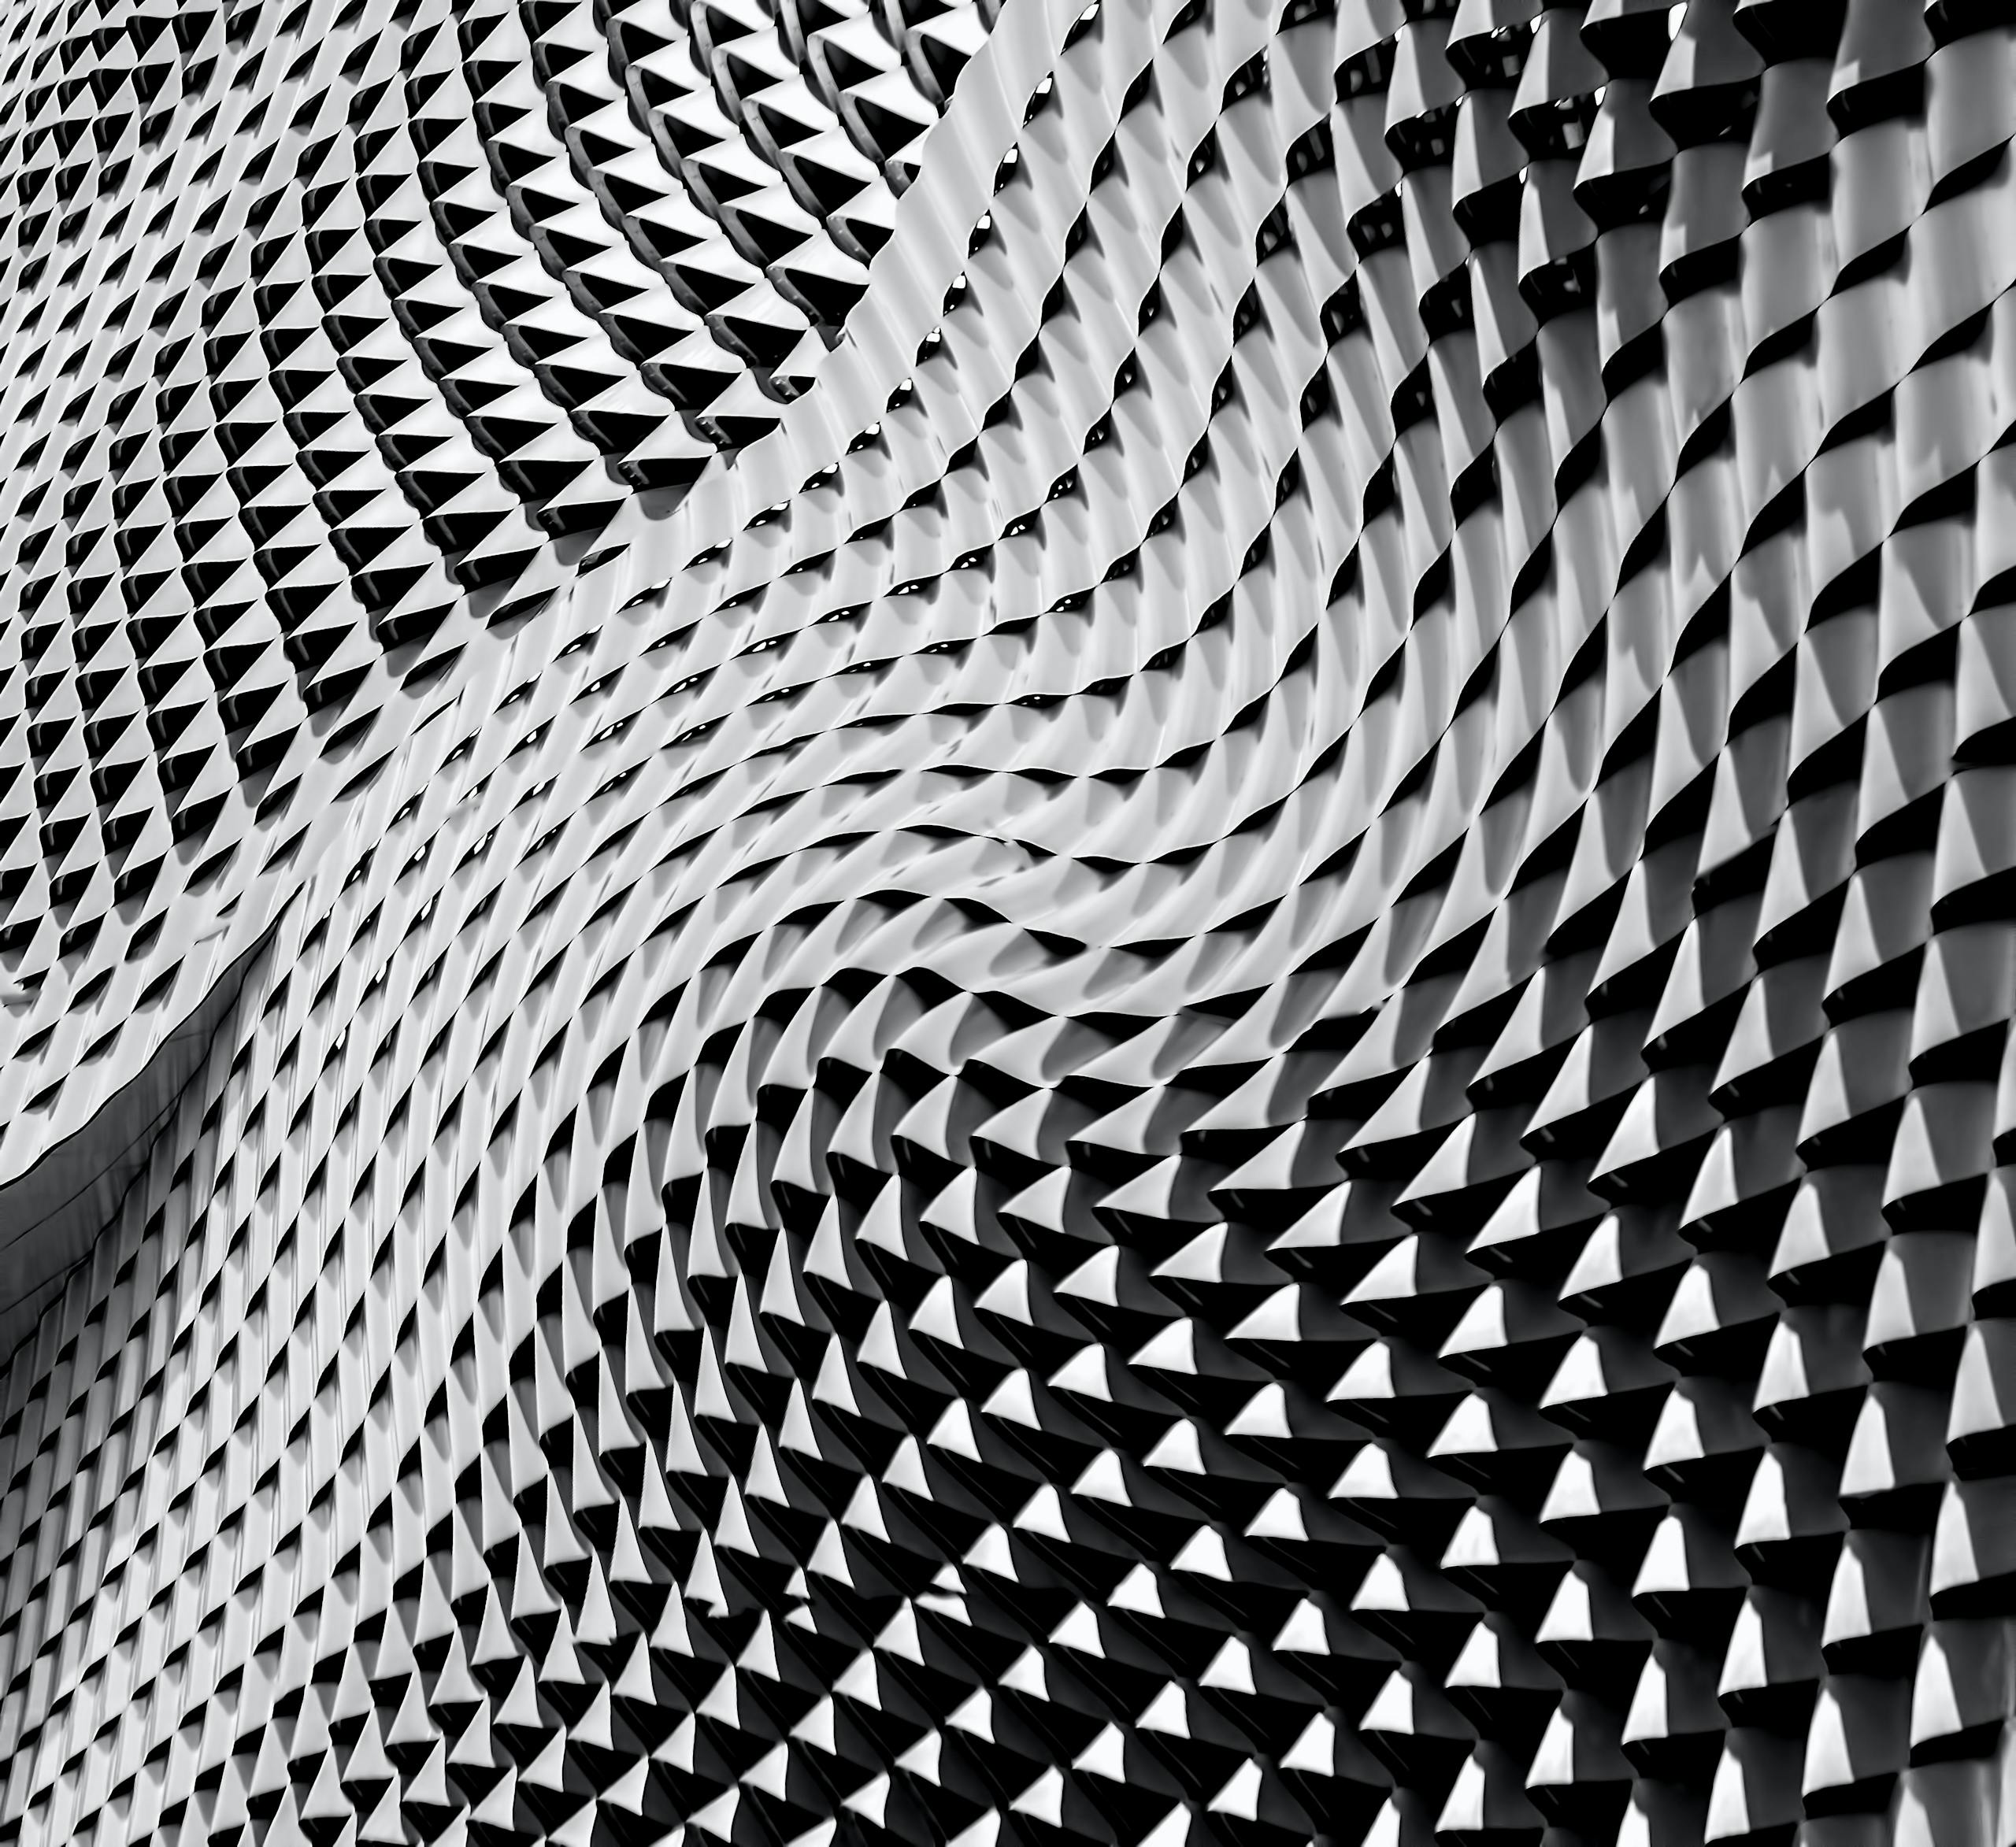 Wavy triangular architectural surface in black and white